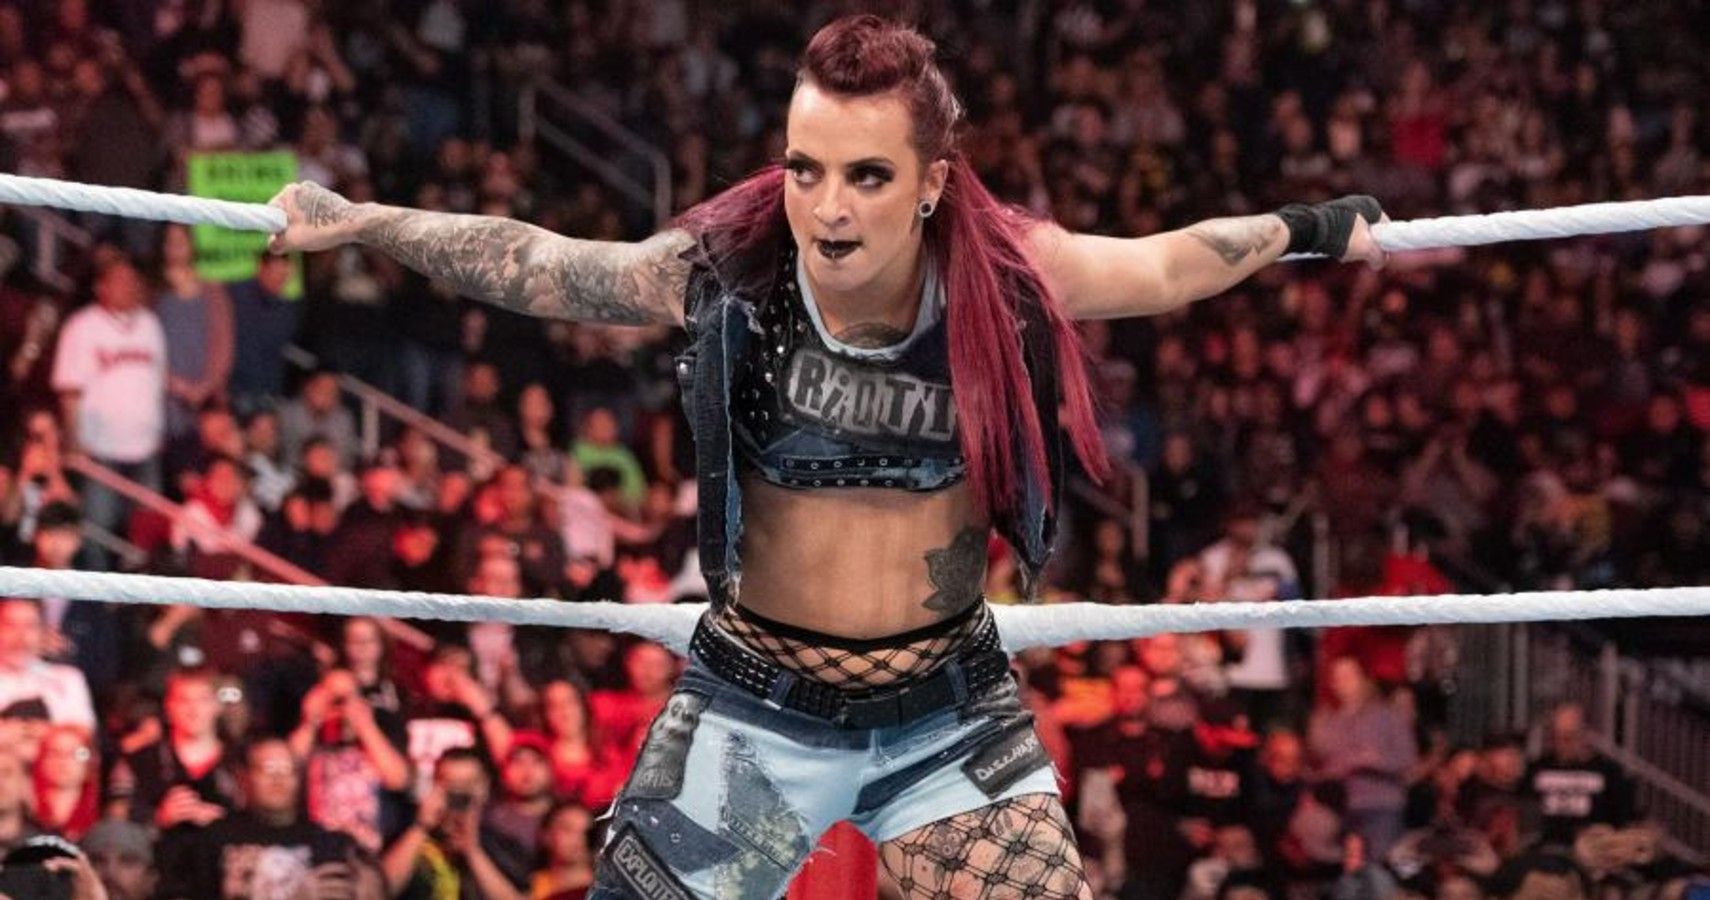 Former WWE Superstar Ruby Riott in the ring during a WWE event